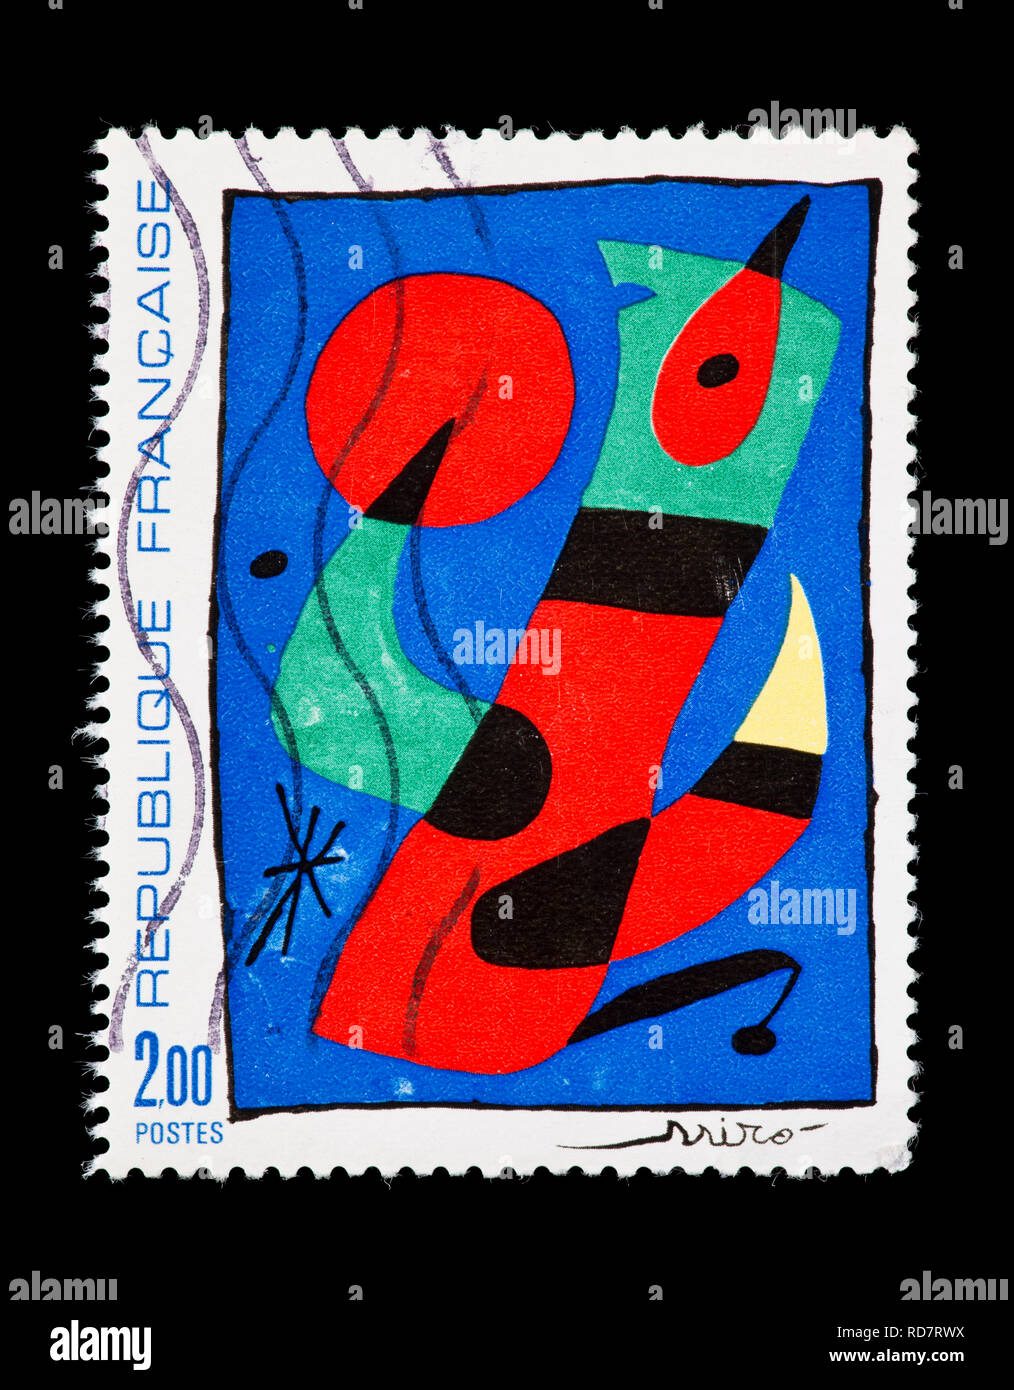 Postage stamp from France depicting a Joan Miro painting Stock Photo